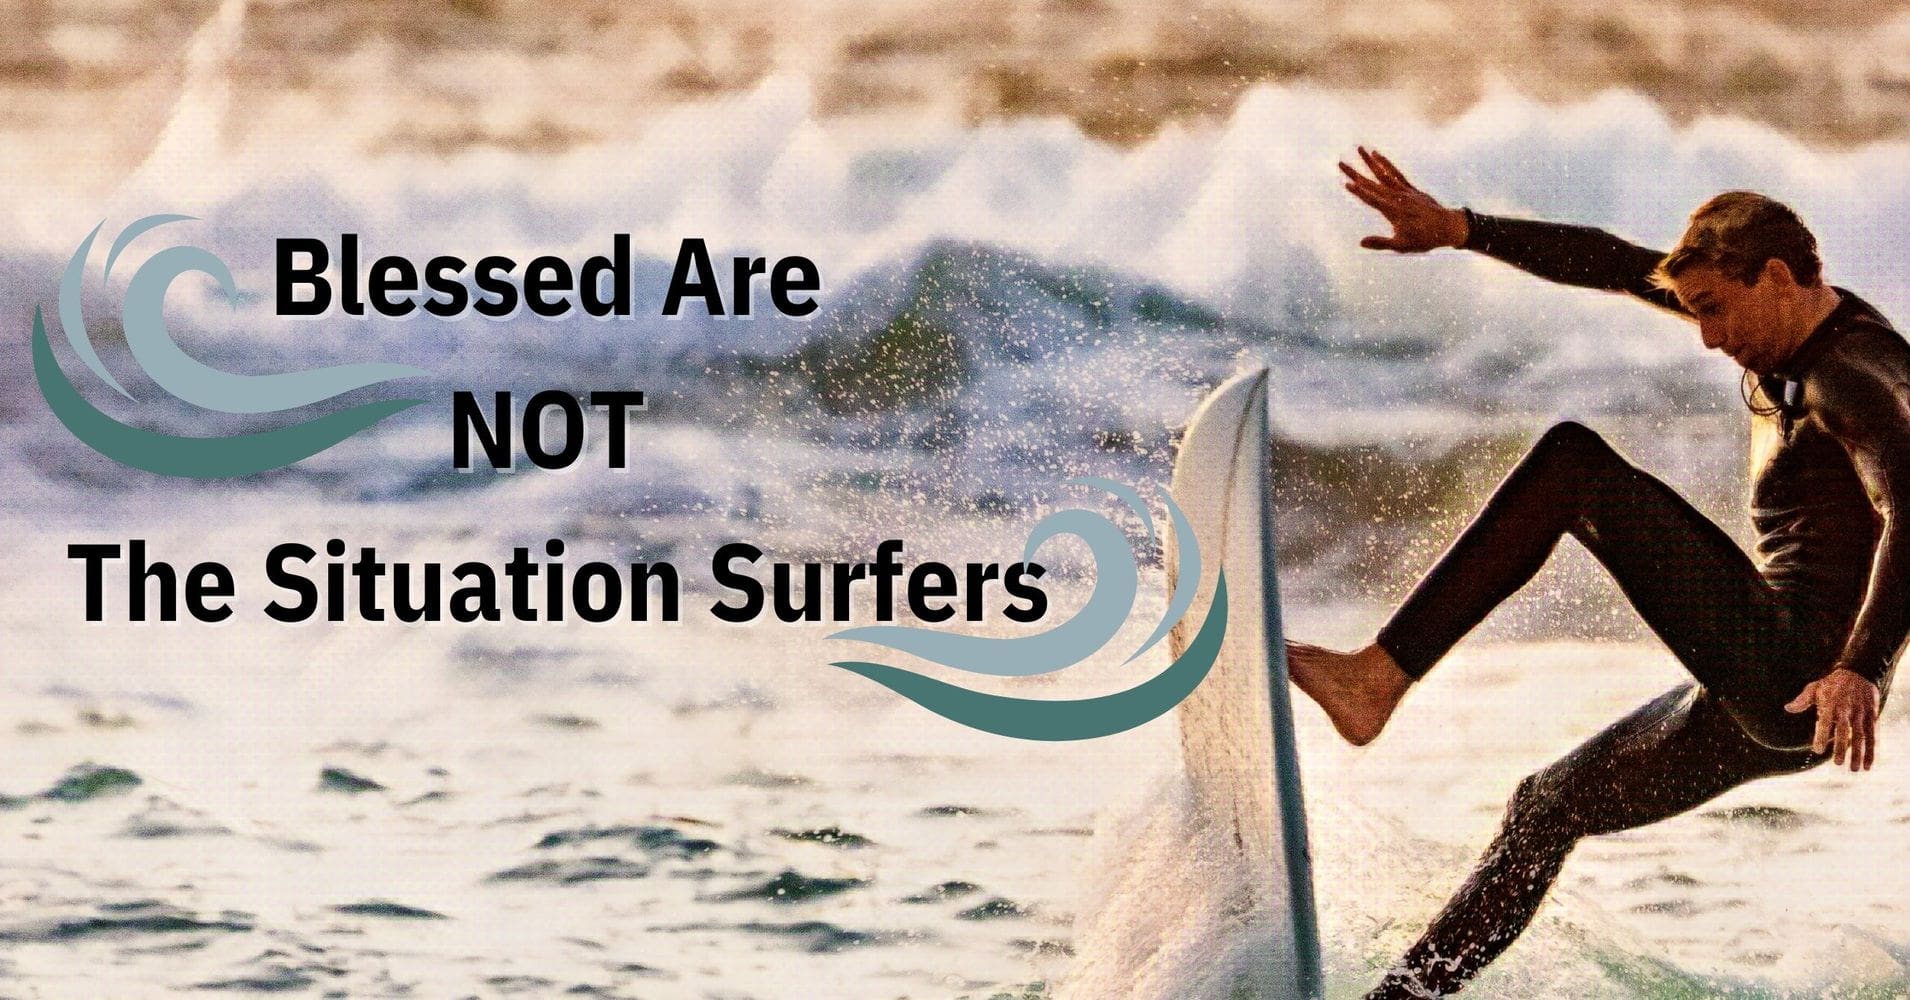 Featured image for “Blessed Are NOT The Situation Surfers”